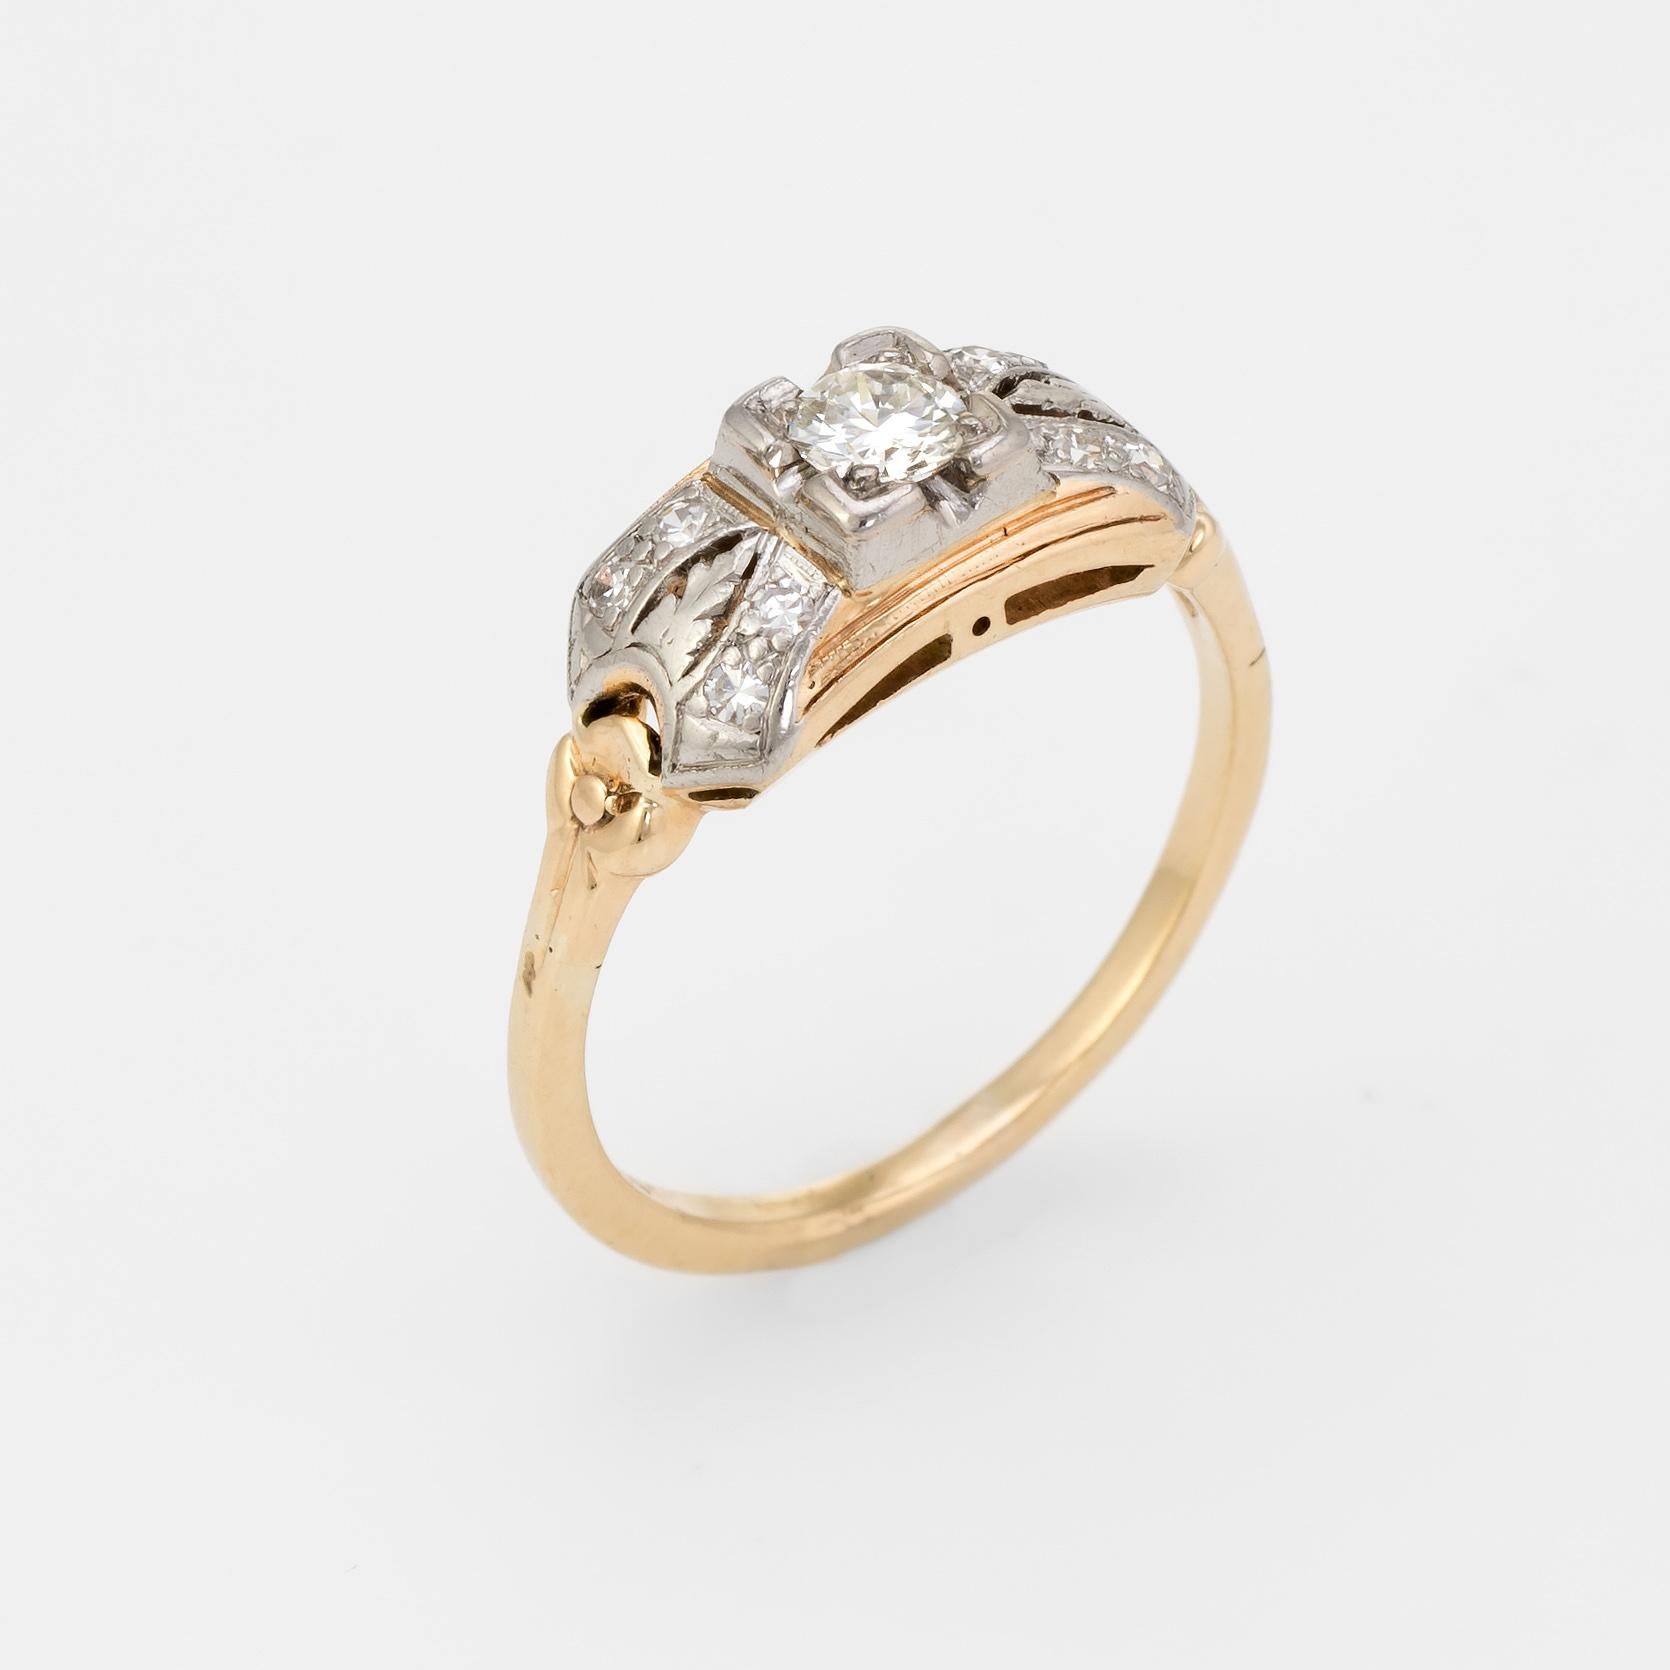 Finely detailed vintage Art Deco era engagement ring (circa 1920s to 1930s), crafted in two tone 14k yellow and white gold. 

Centrally mounted estimated 0.20 carat transitional cut diamond is accented with a further 8 estimated 0.01 carat single